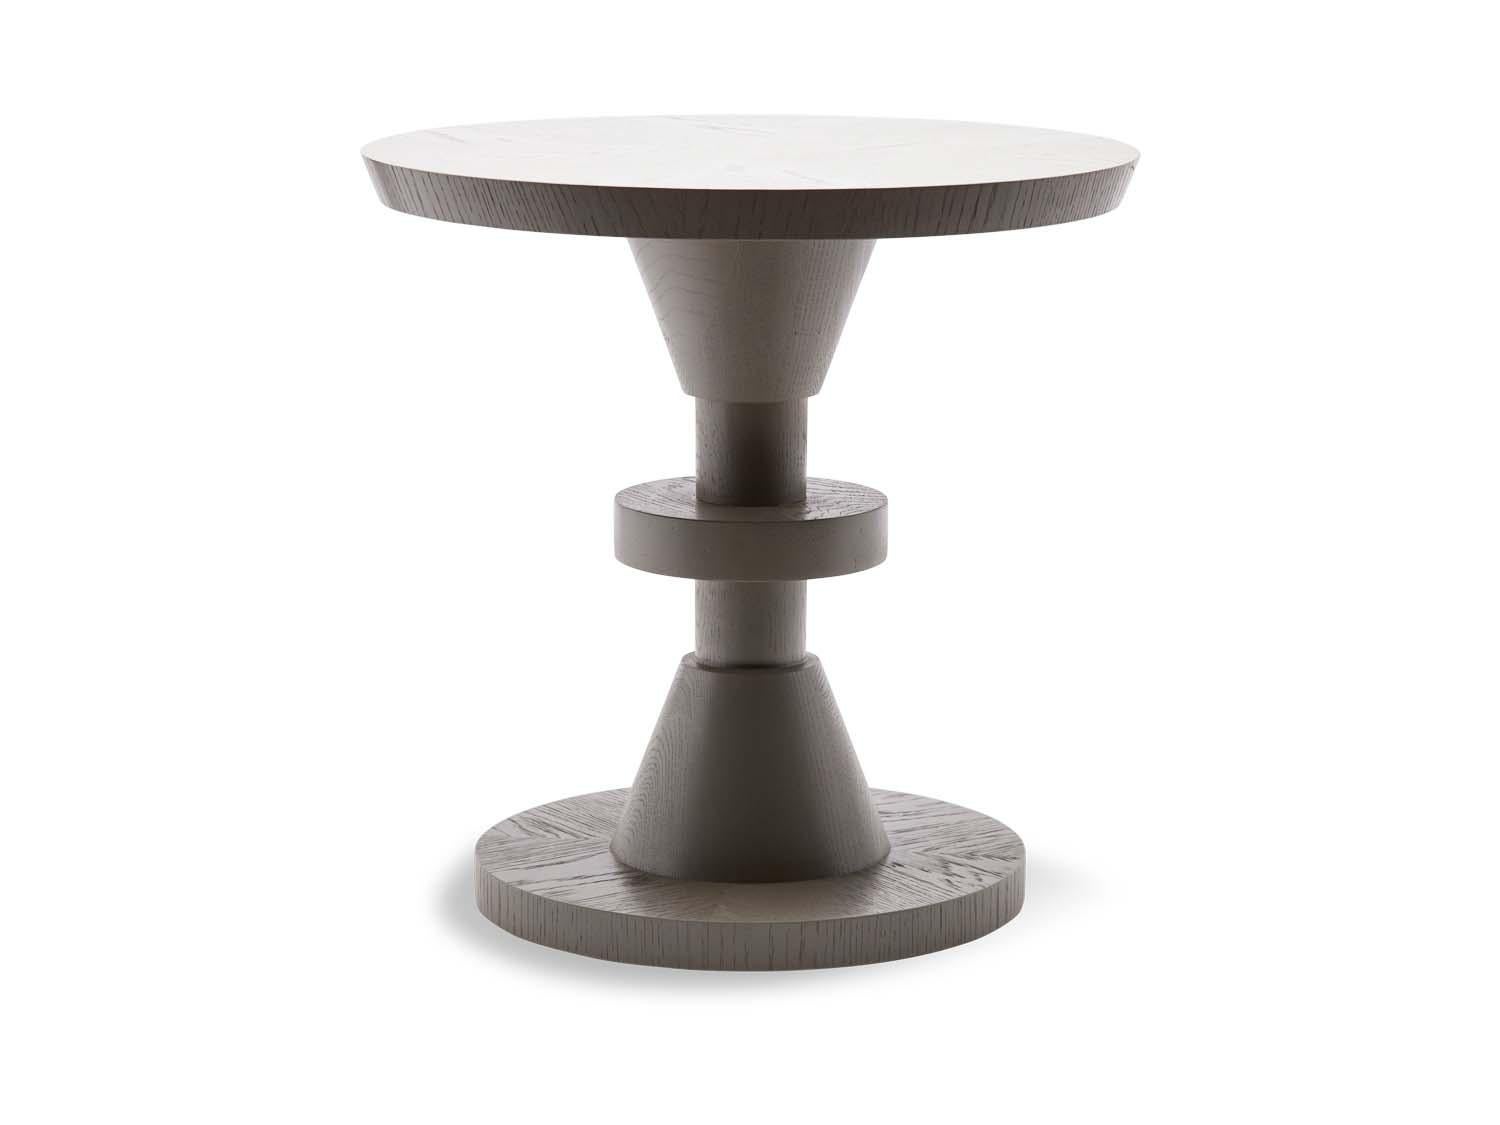 The capitola table features a series of geometric shapes stacked on top of each other with solid wood details. Available in American walnut or white oak. Shown here in Chelsea Grey Pigmented Oak

The Lawson-Fenning Collection is designed and